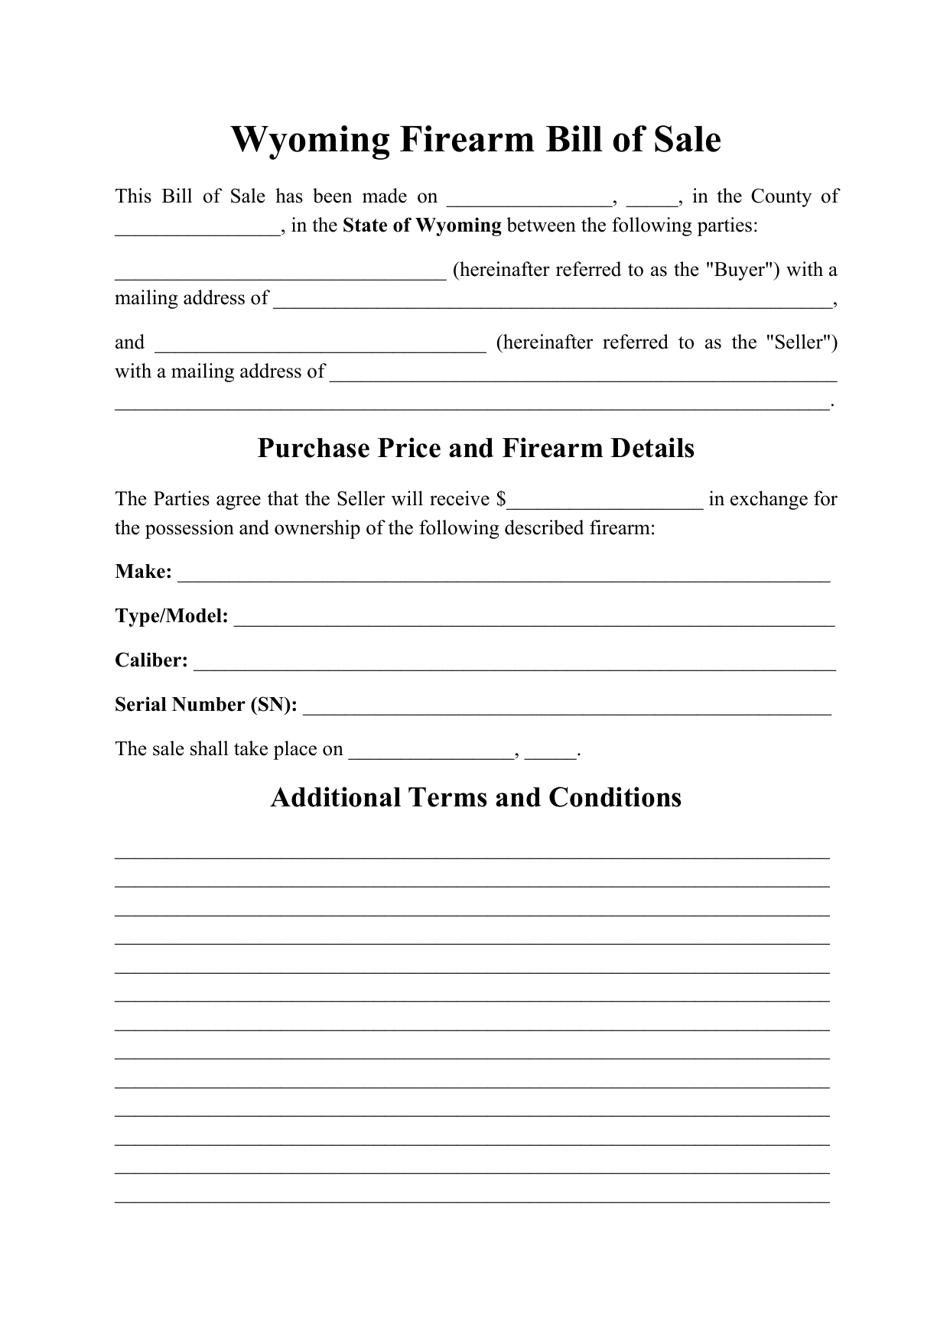 Firearm Bill of Sale Form - Wyoming, Page 1